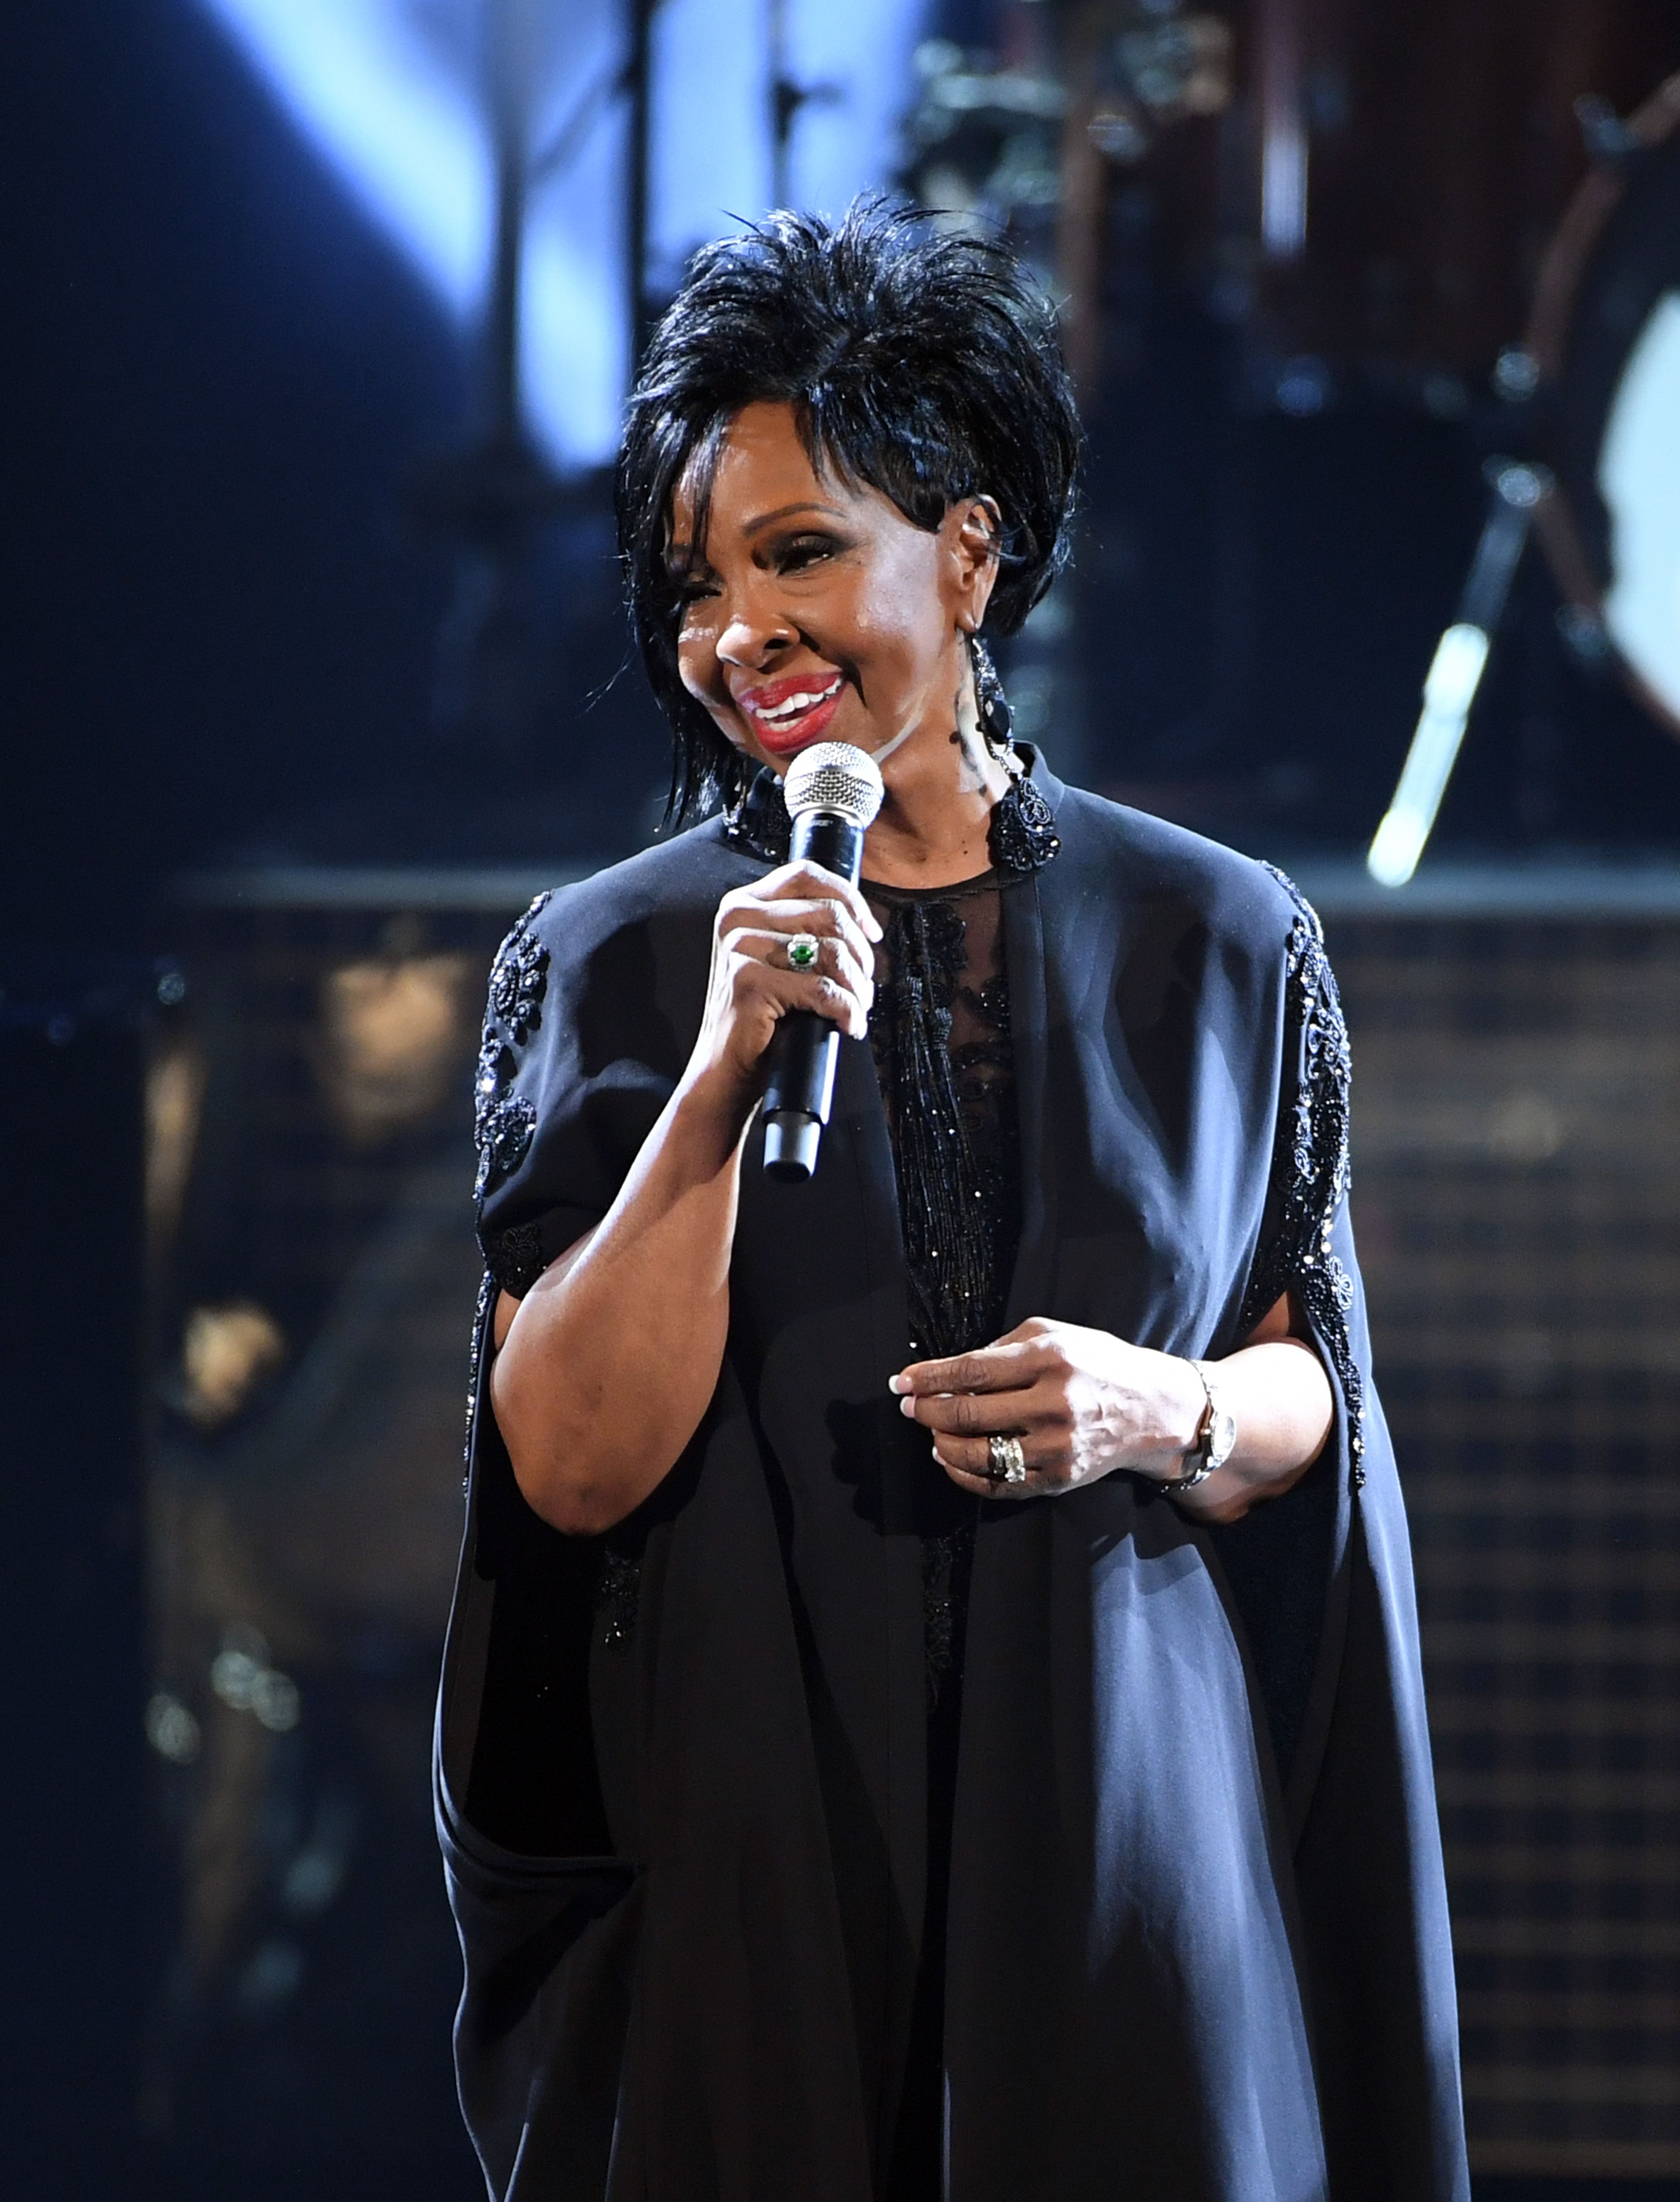 Gladys Knight performs during the 2018 American Music Awards at Microsoft Theater on October 9, 2018 in Los Angeles, California. | Source: Getty Images